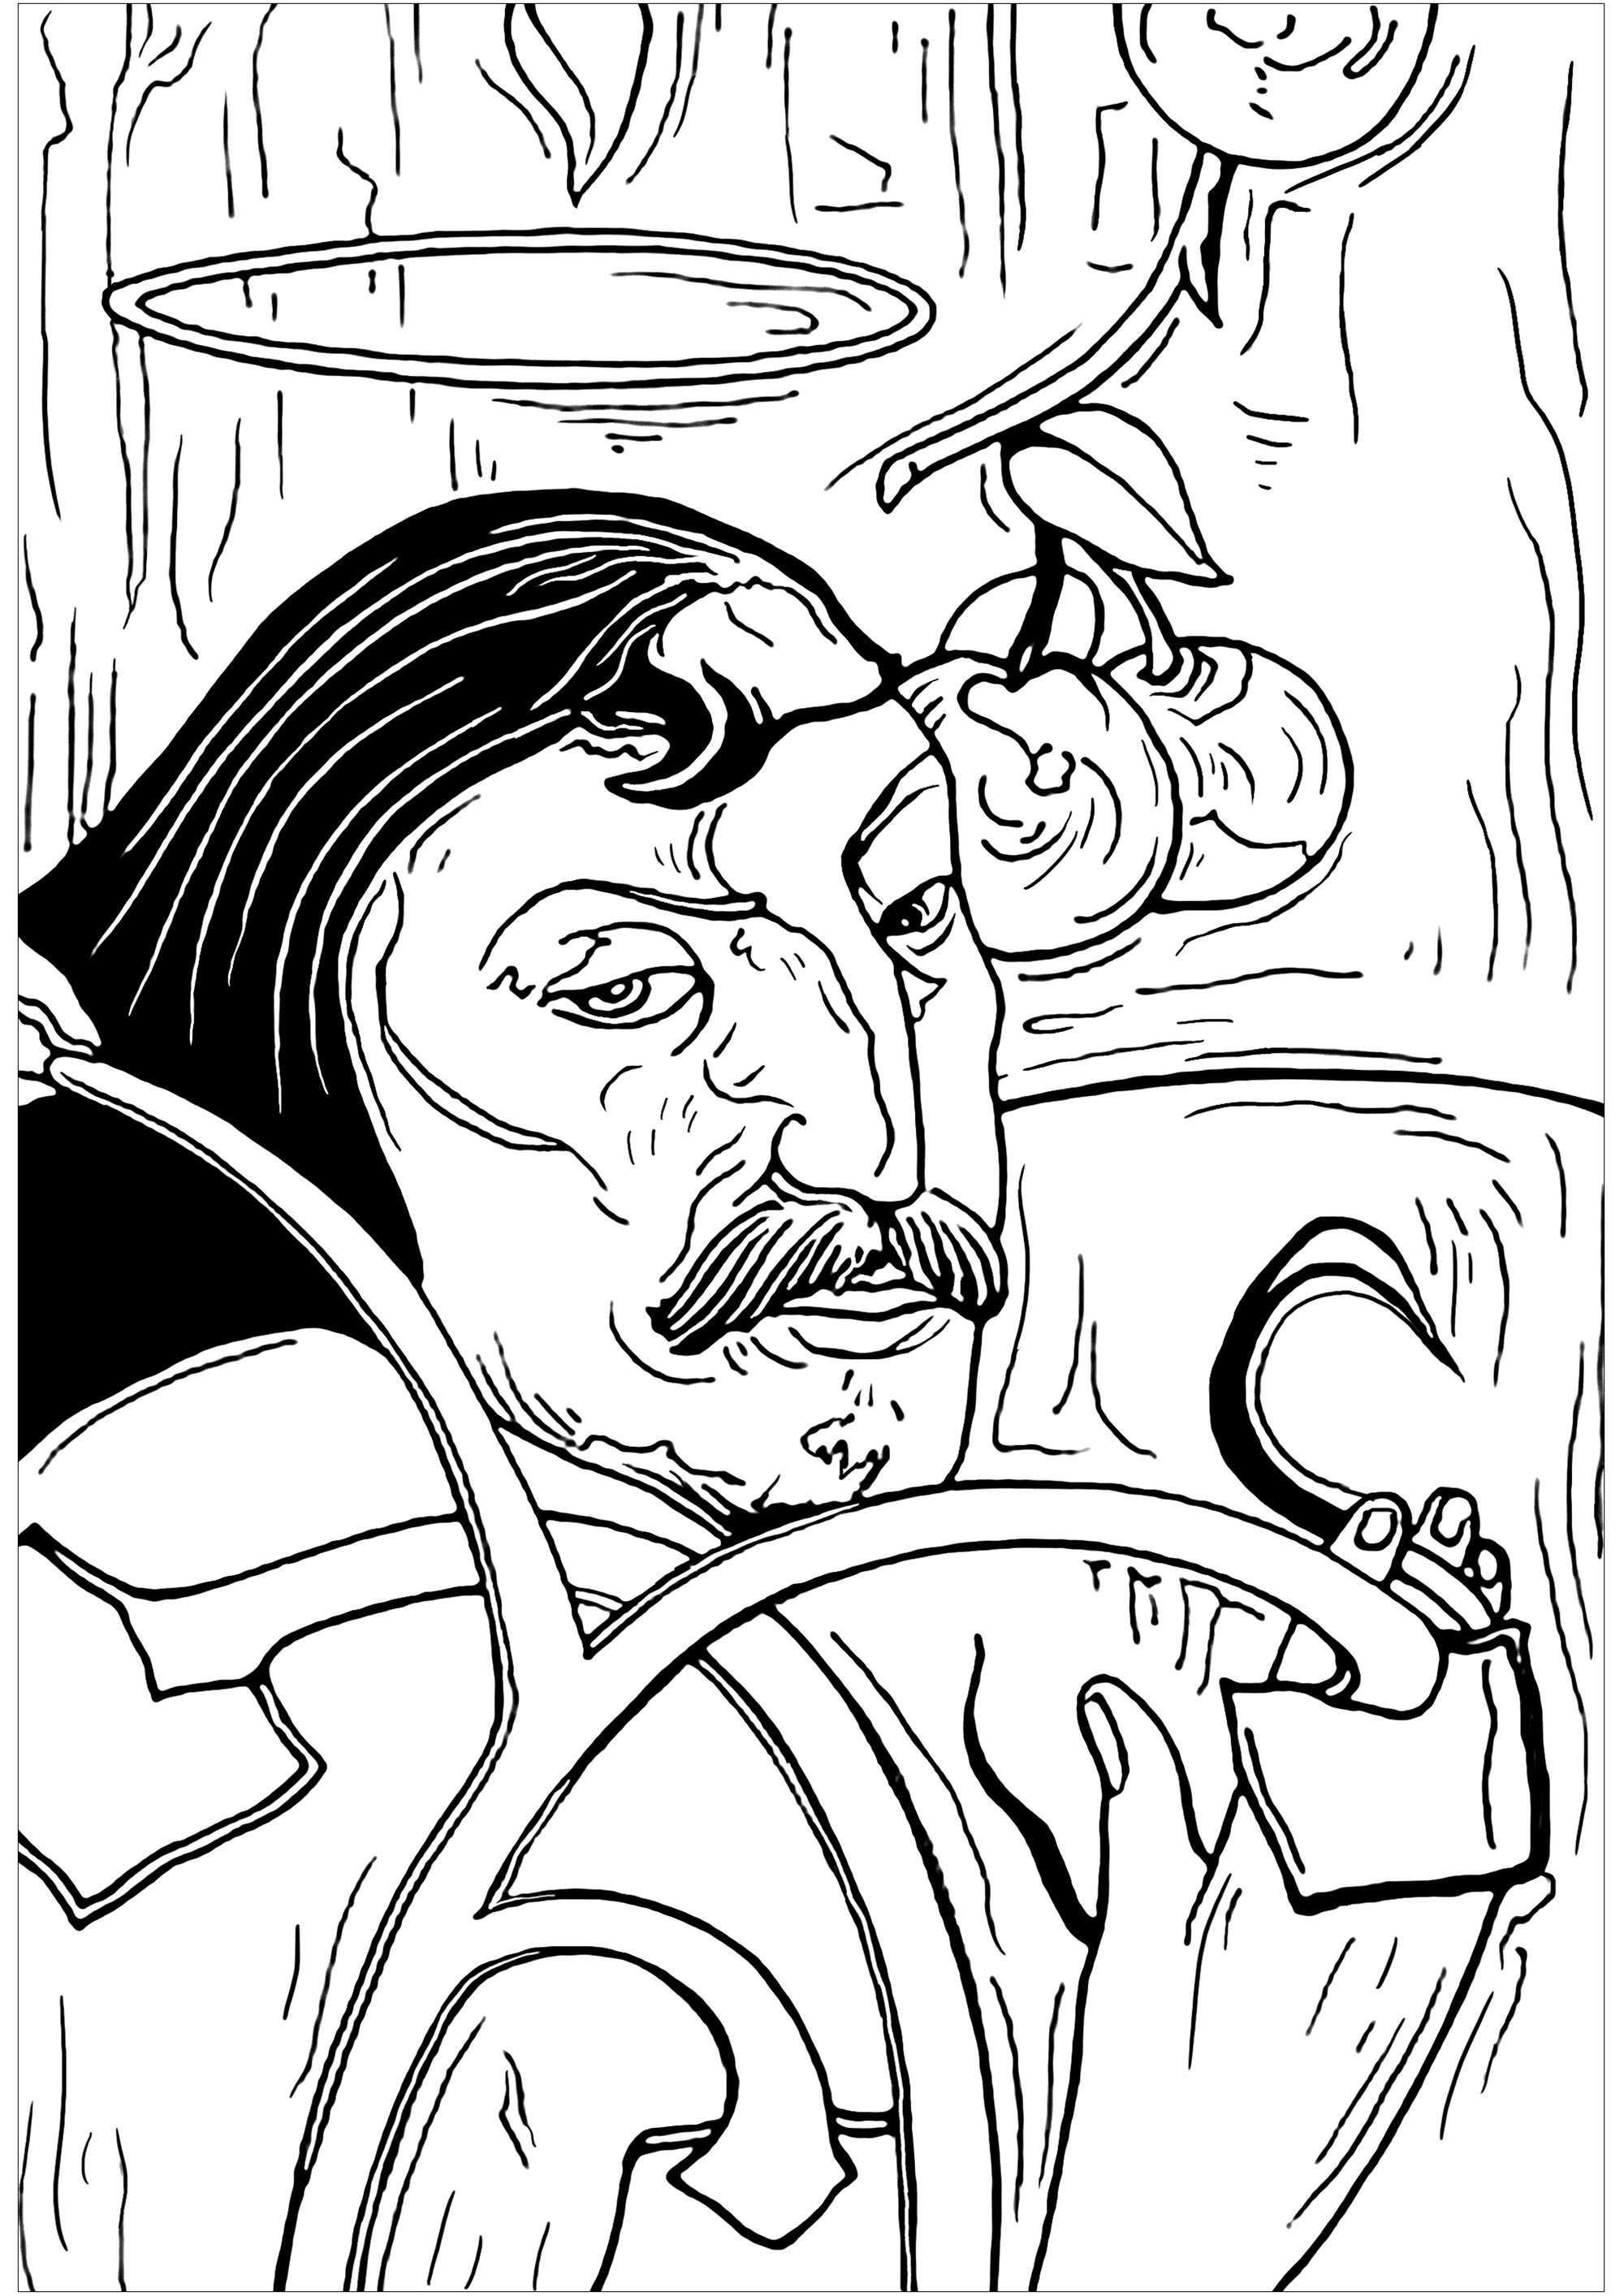 Paul Coloring Pages Paul Gauguin Self Portrait With Halo Masterpieces Adult Coloring